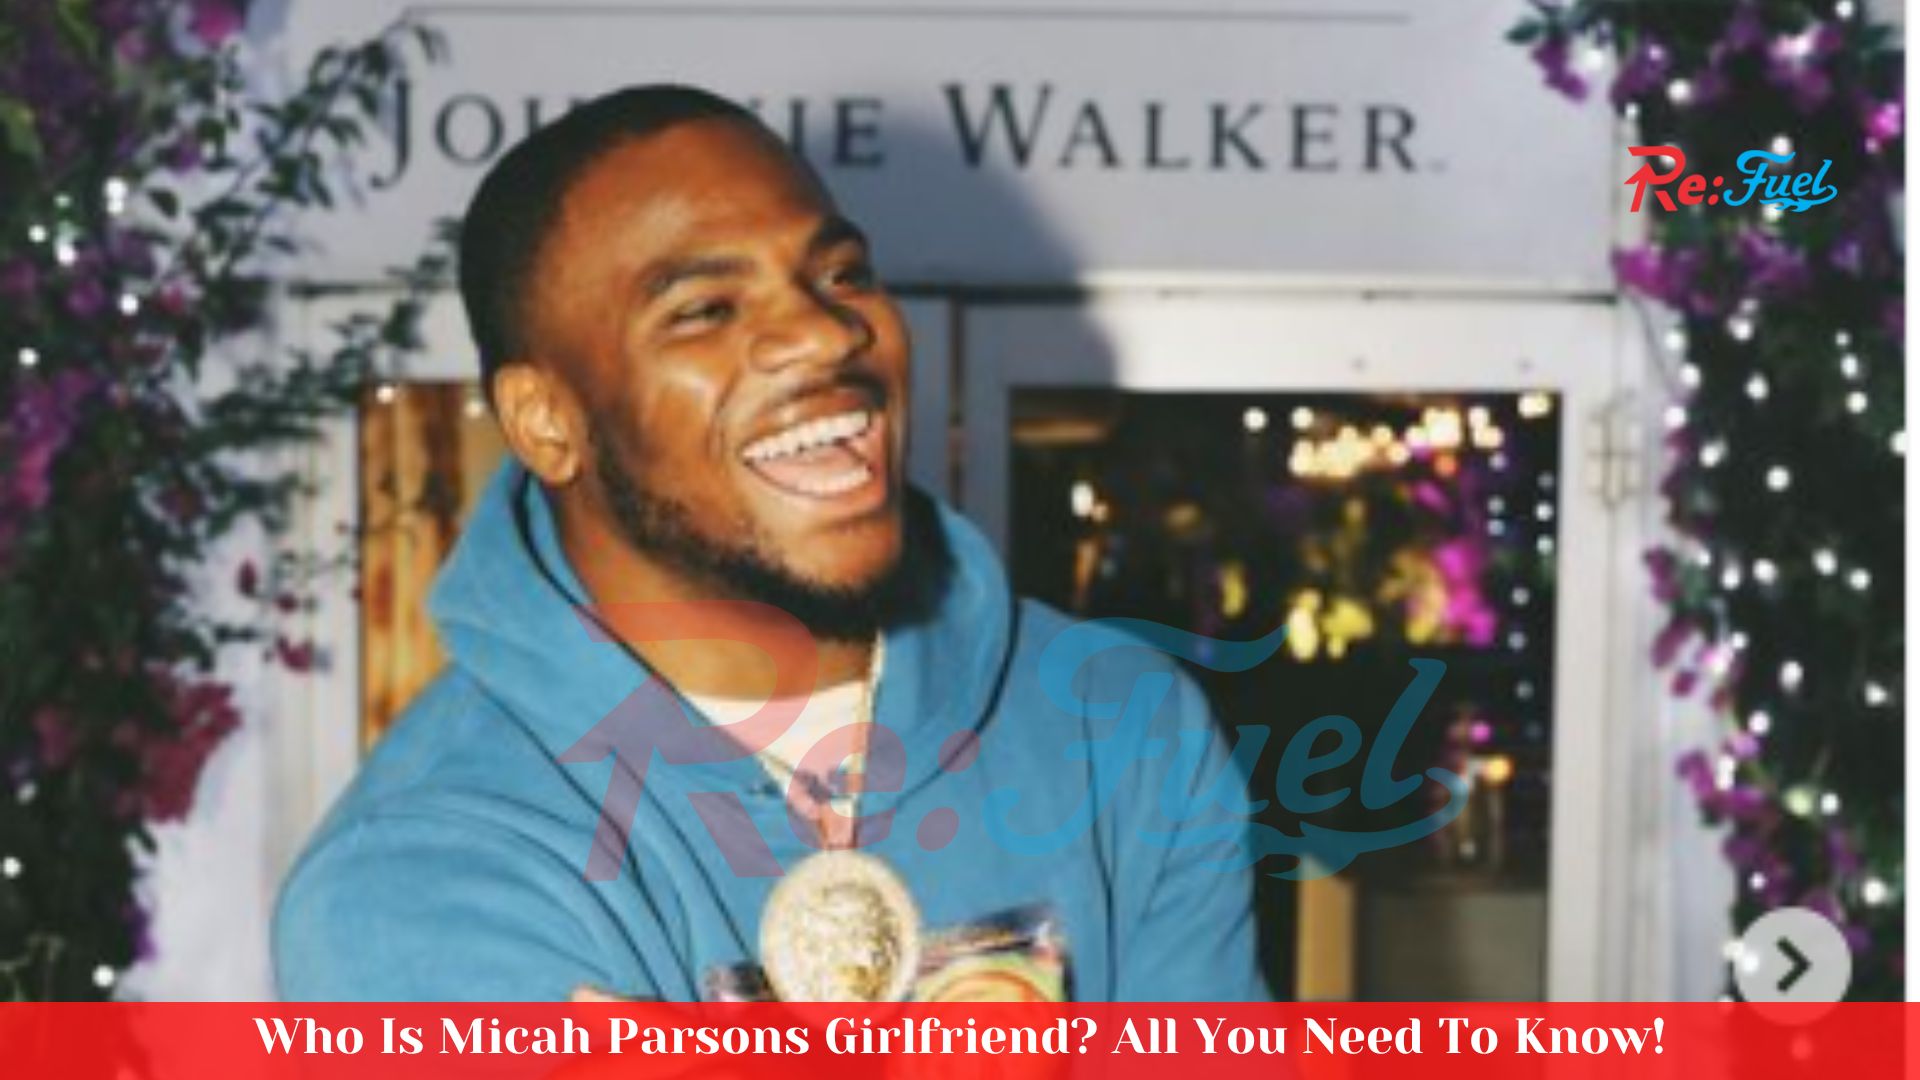 Who Is Micah Parsons Girlfriend? All You Need To Know!